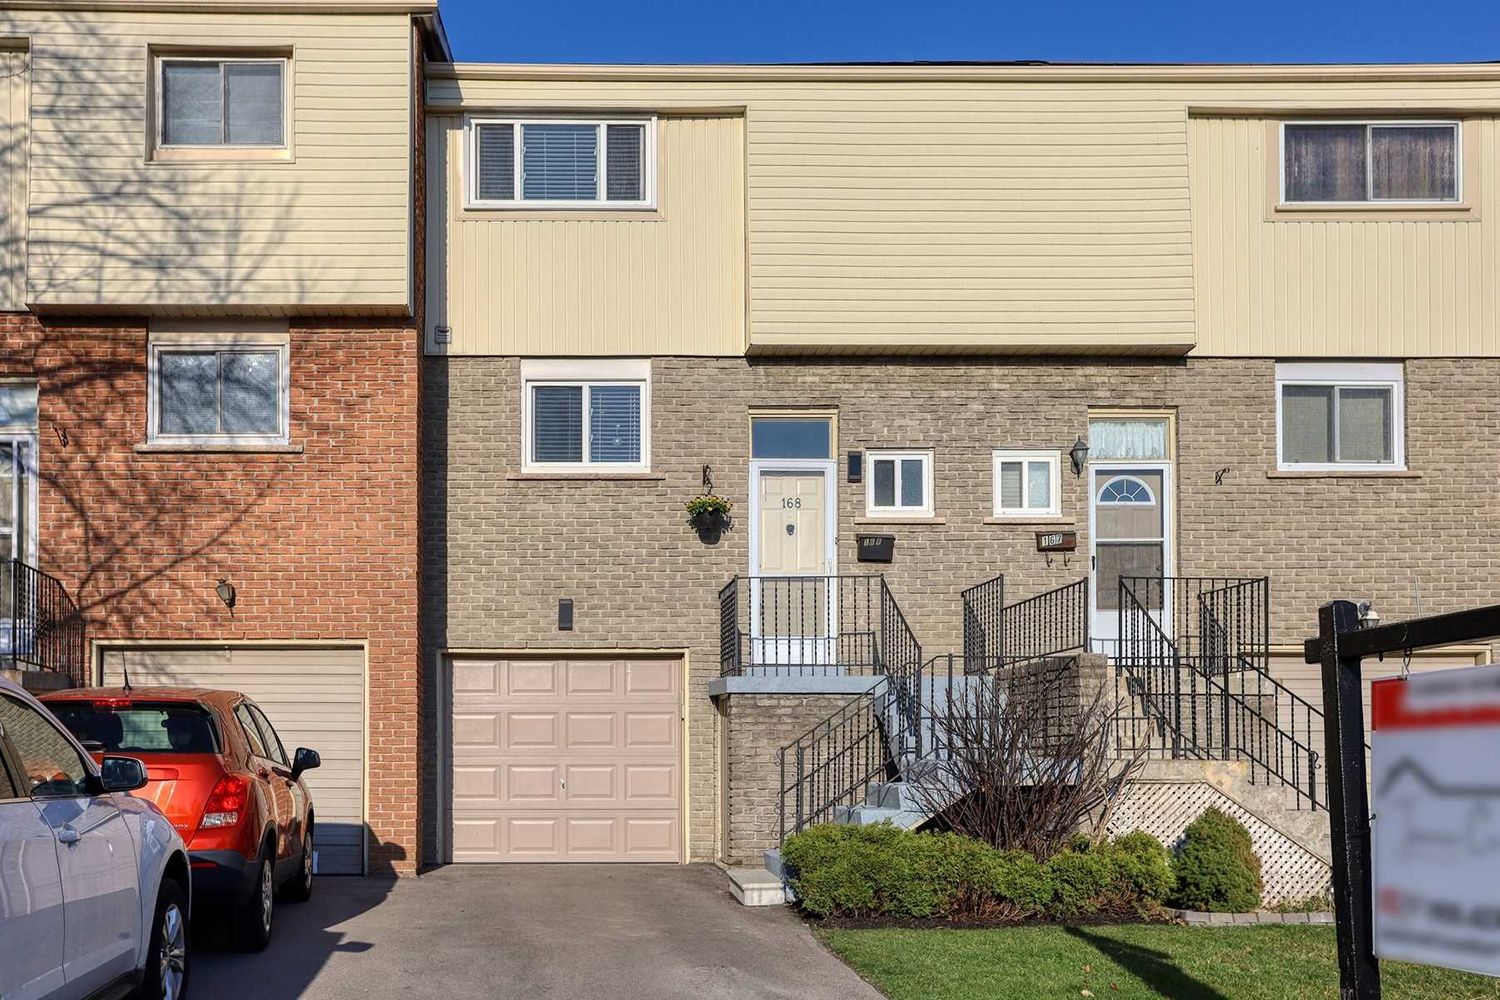 1915 Denmar Road. 1915 Denmar Townhomes is located in  Pickering, Toronto - image #1 of 2